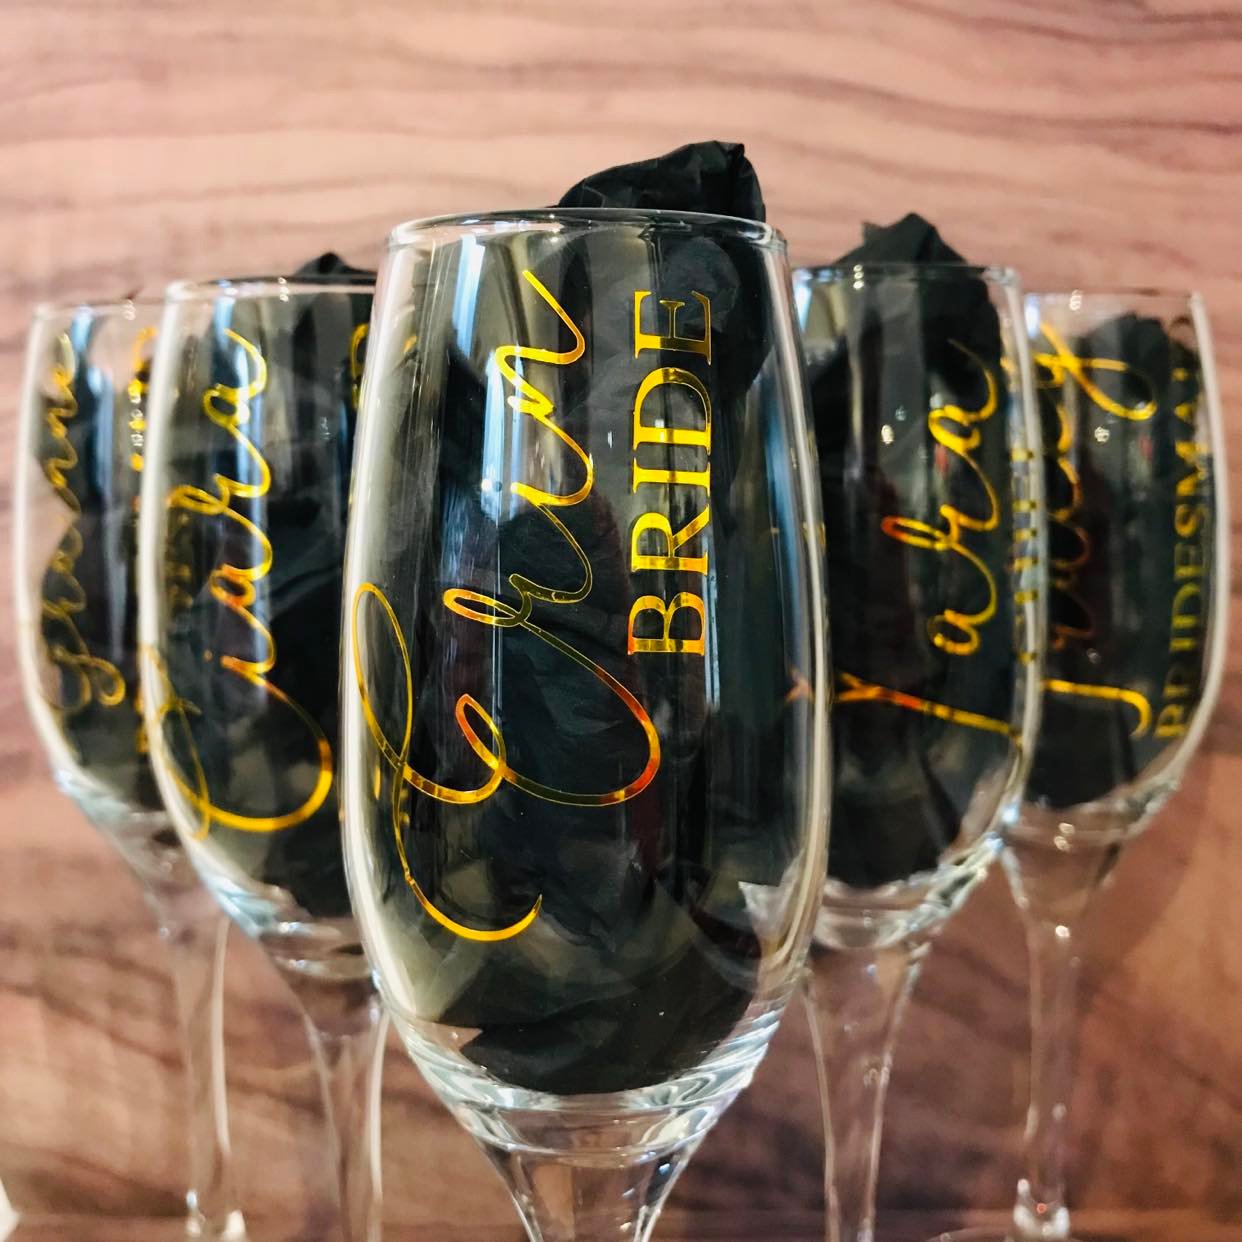 Wedding Party Champagne Flutes